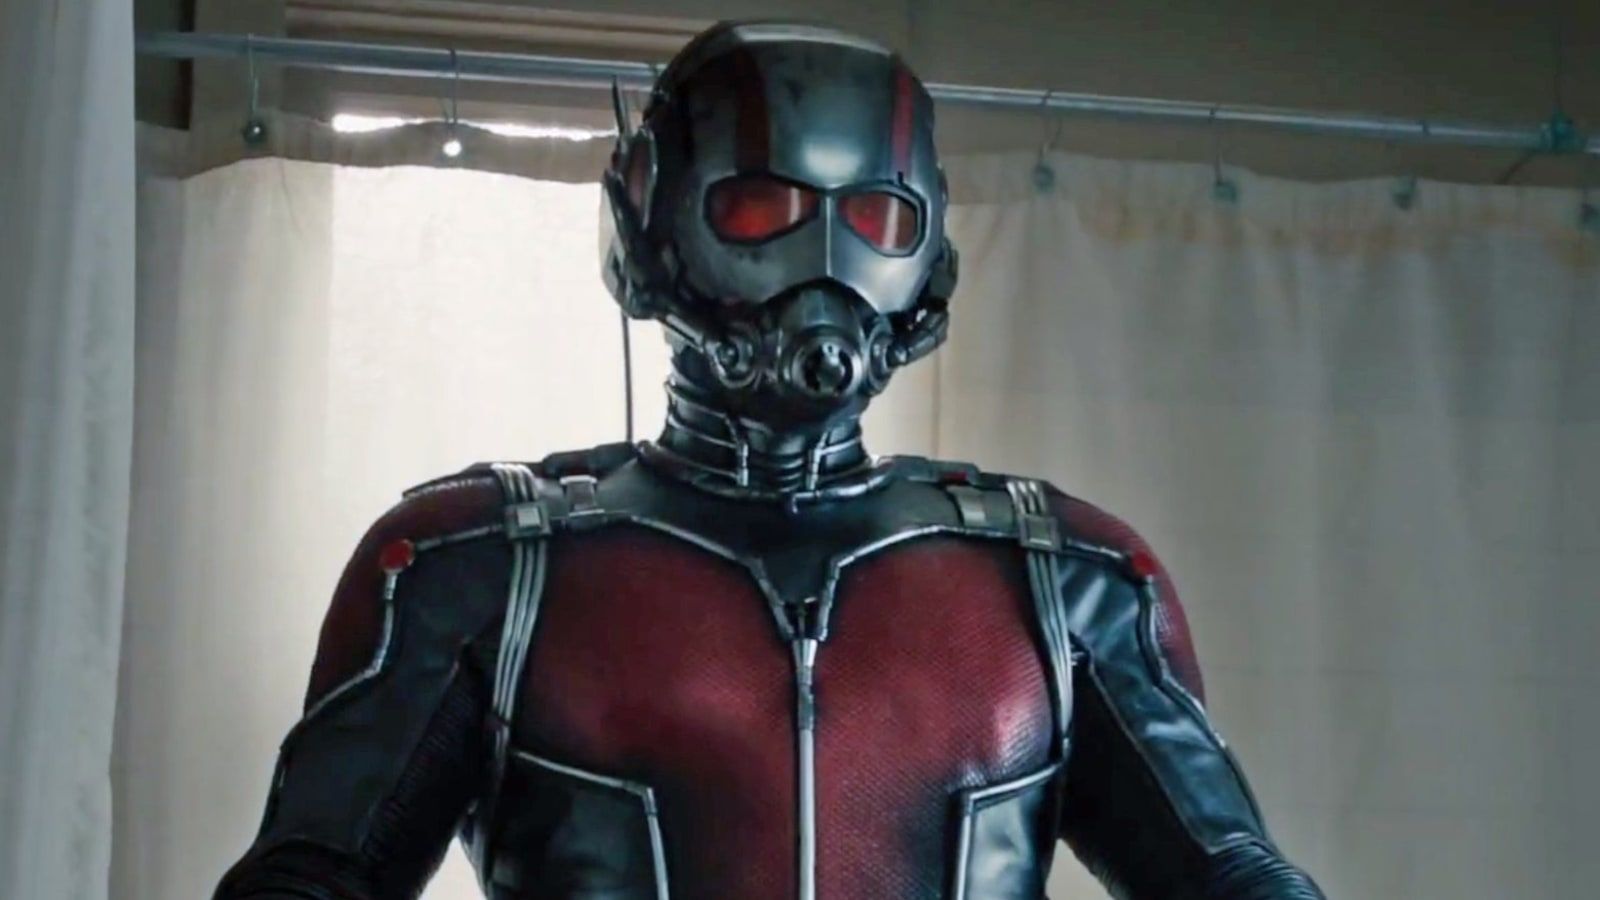 Marvel Expands Movie Slate With 'Ant Man' Sequel In 2018